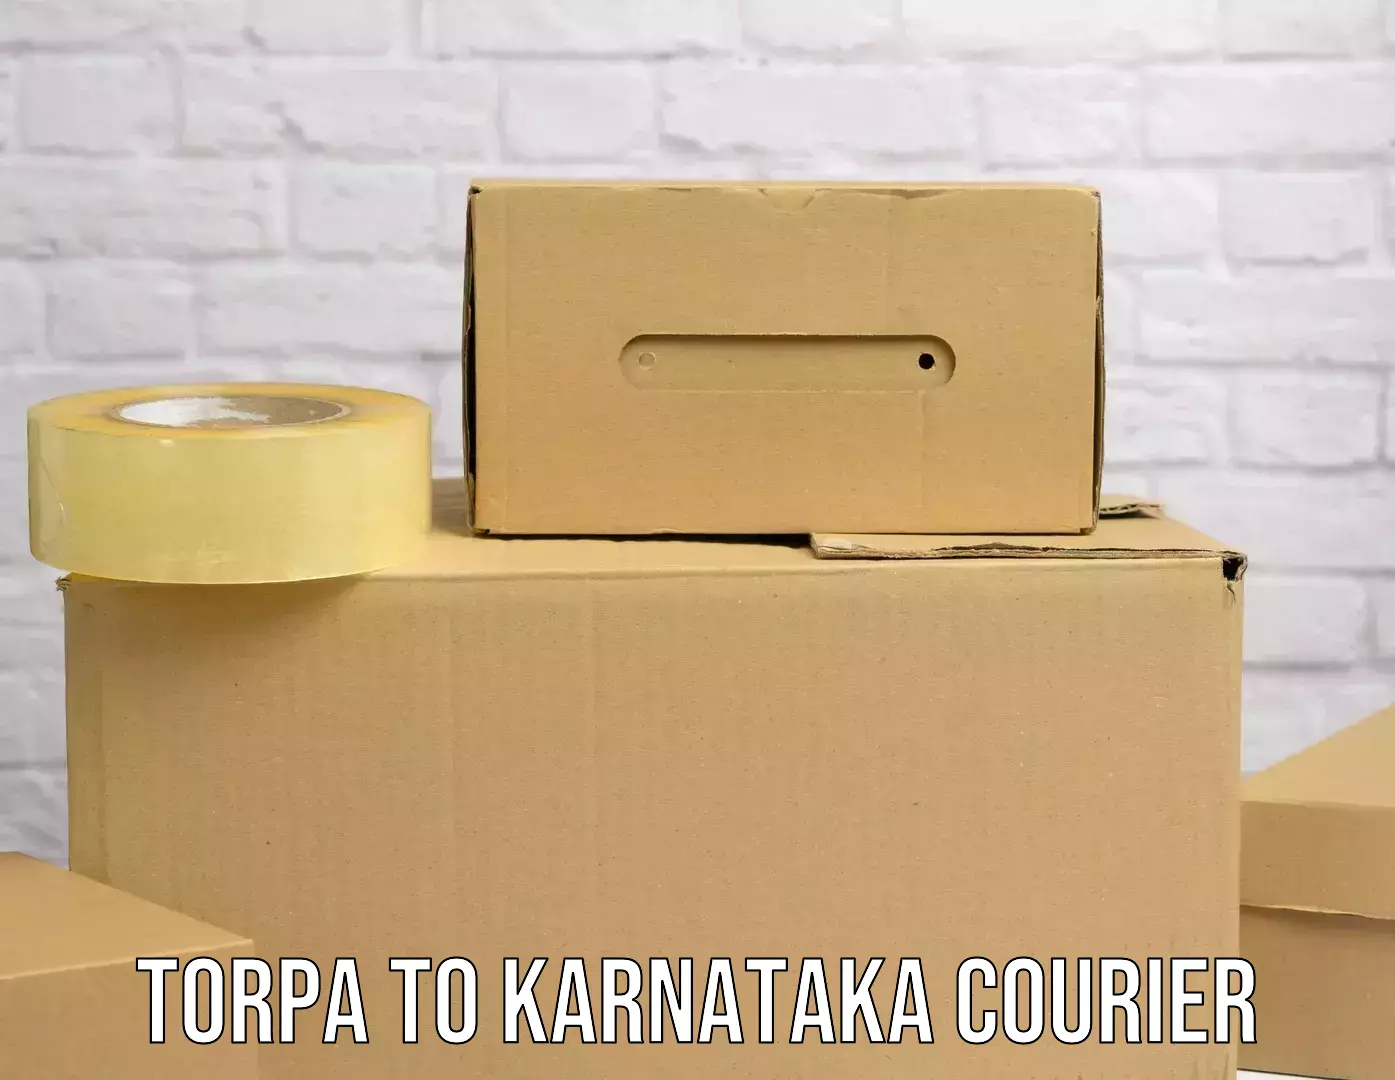 Same-day delivery solutions Torpa to Karnataka